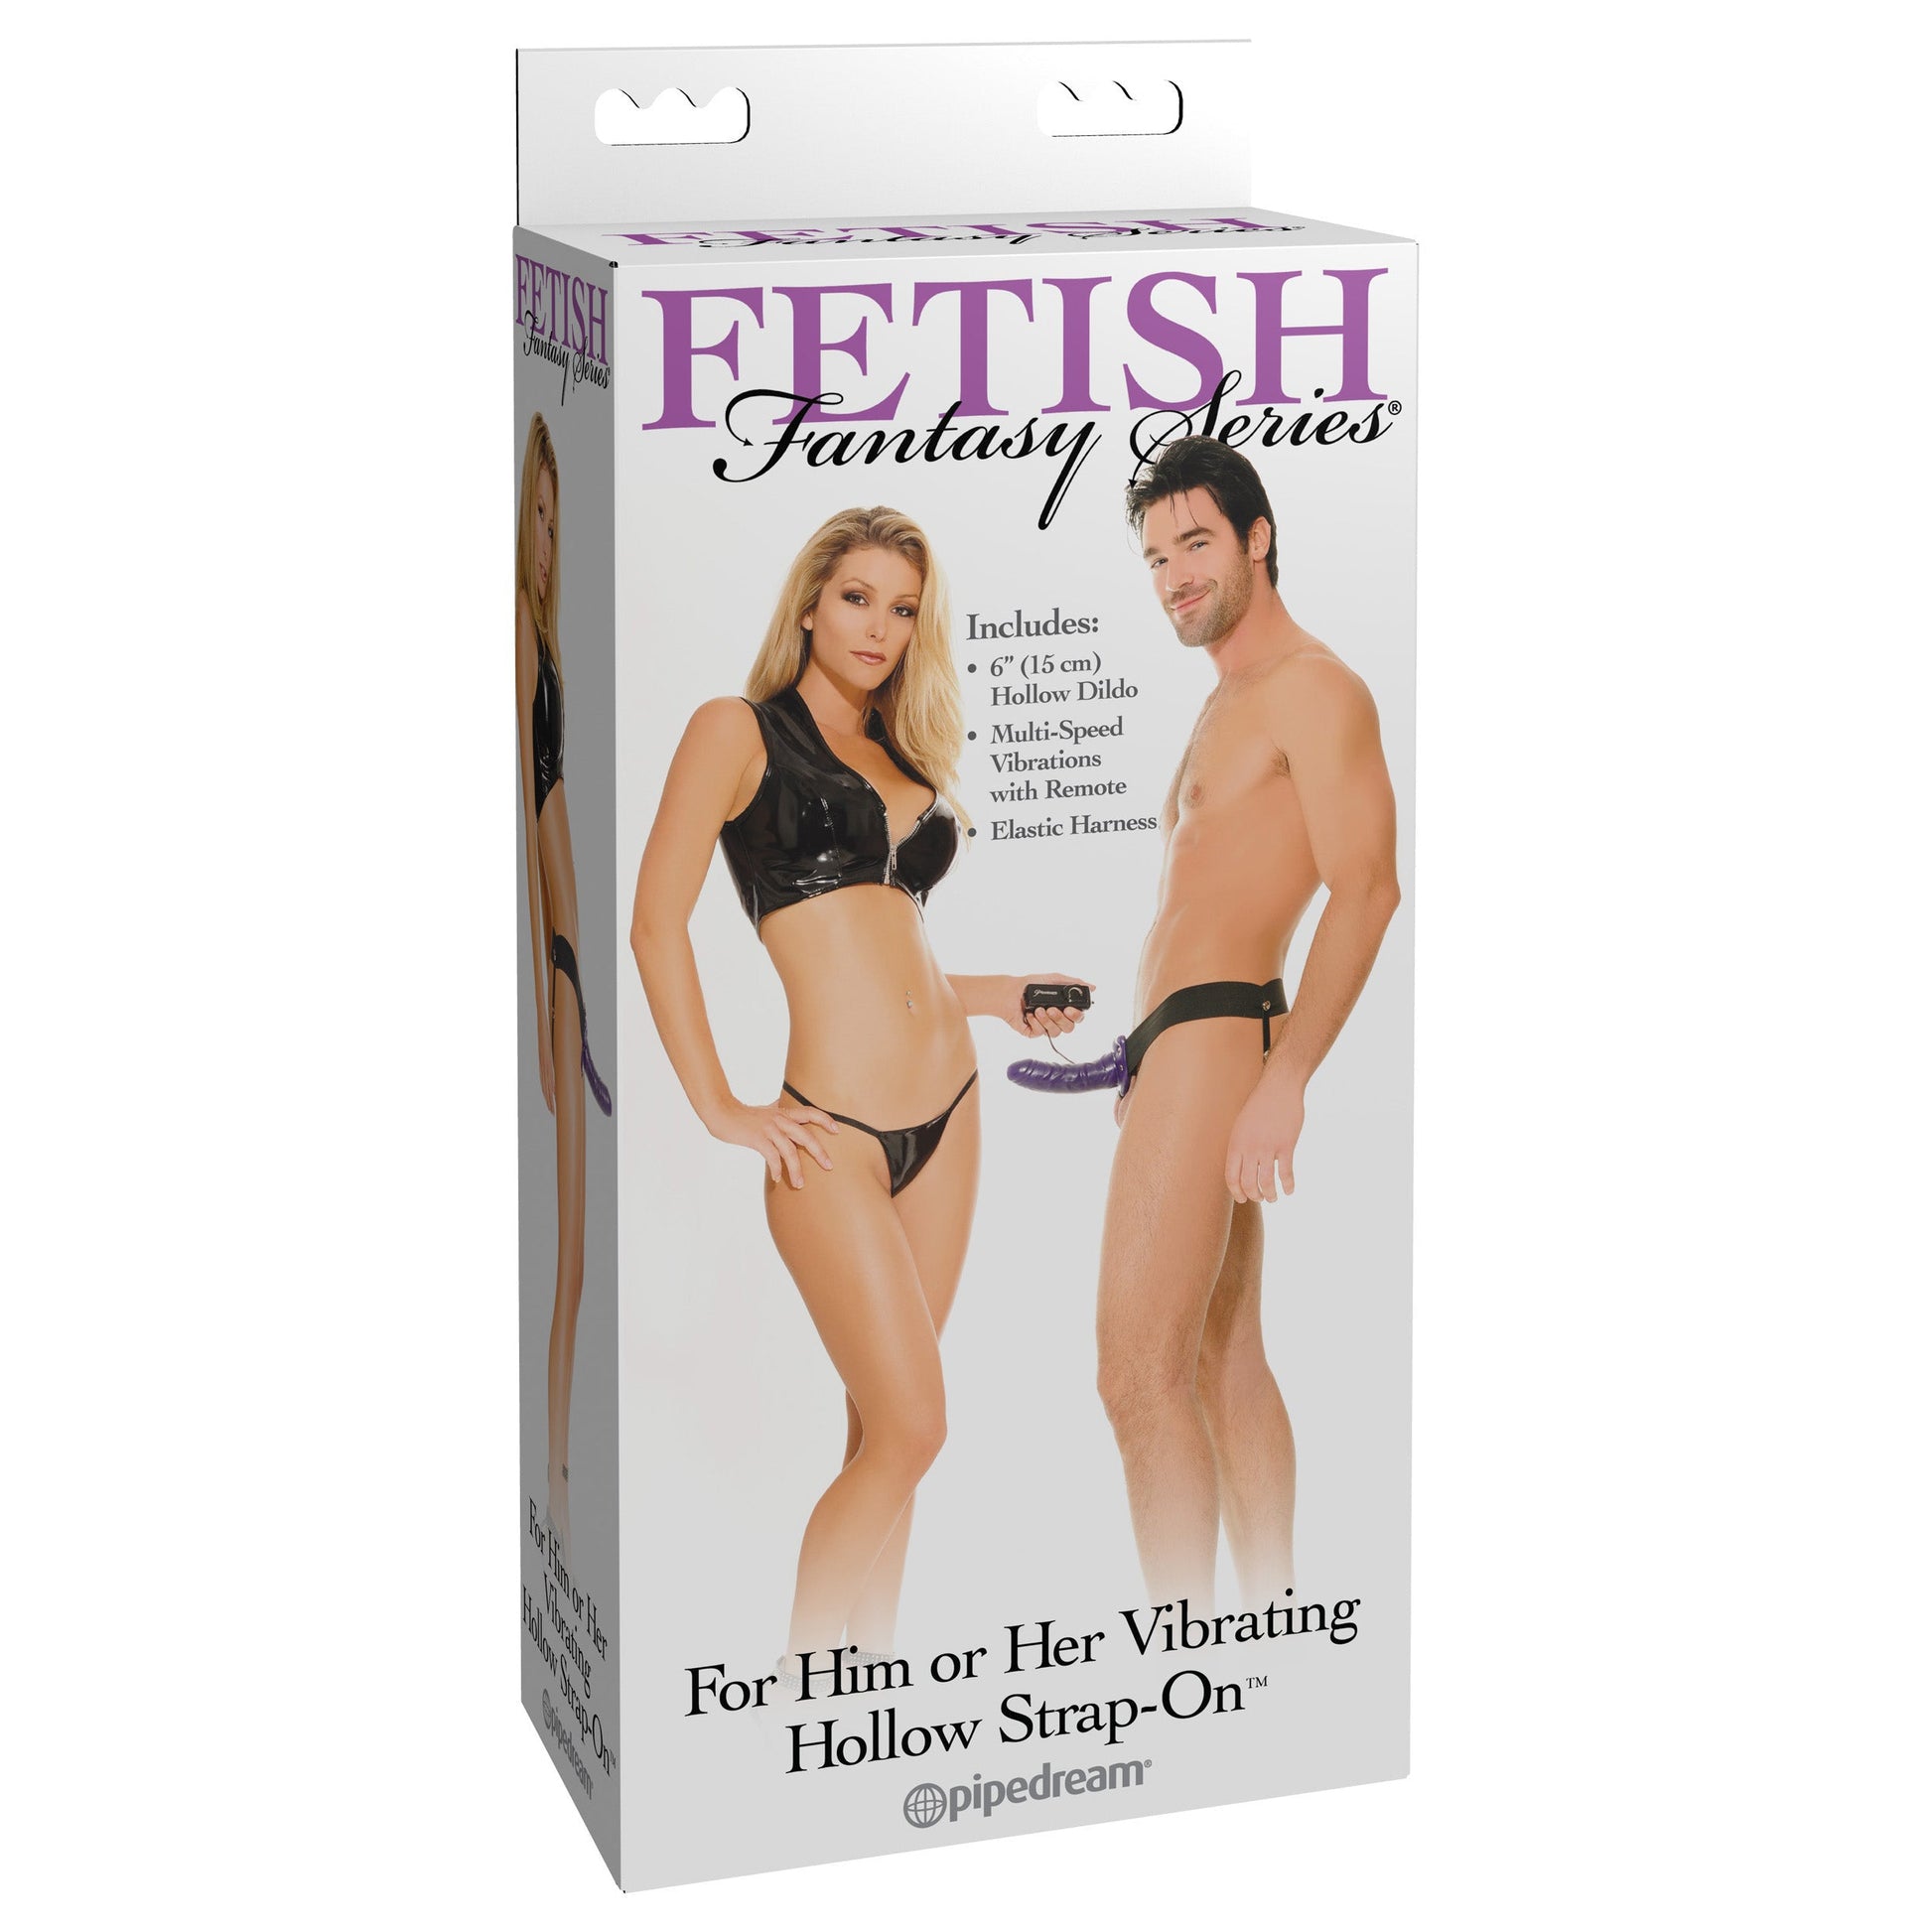 Fetish Fantasy Series for Him or Her Vibrating Hollow Strap-on - Purple